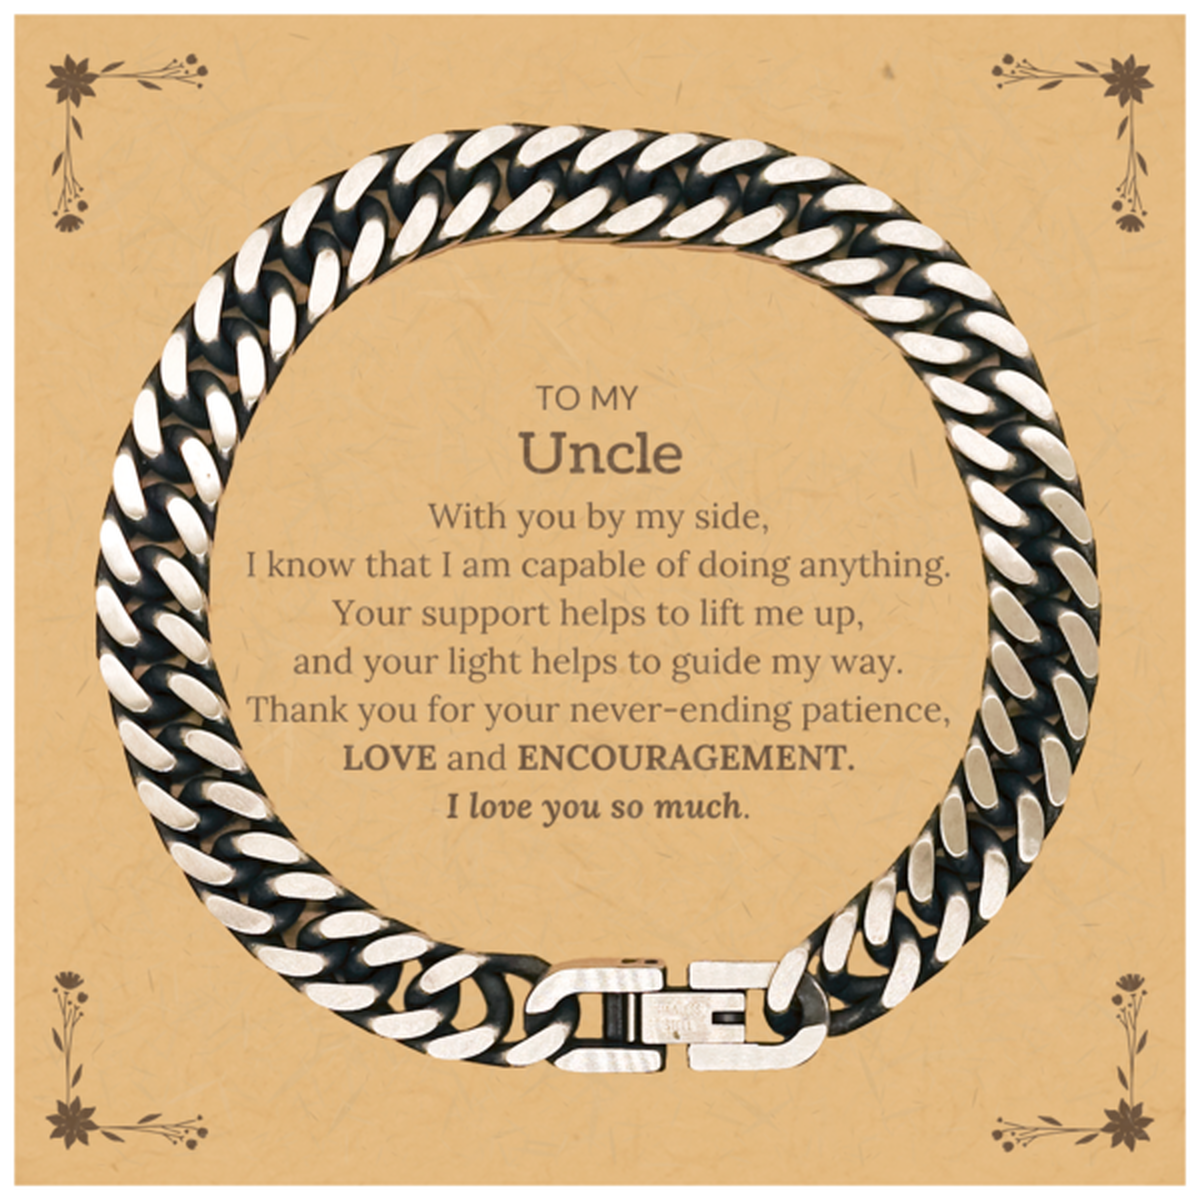 Appreciation Uncle Cuban Link Chain Bracelet Gifts, To My Uncle Birthday Christmas Wedding Keepsake Gifts for Uncle With you by my side, I know that I am capable of doing anything. I love you so much